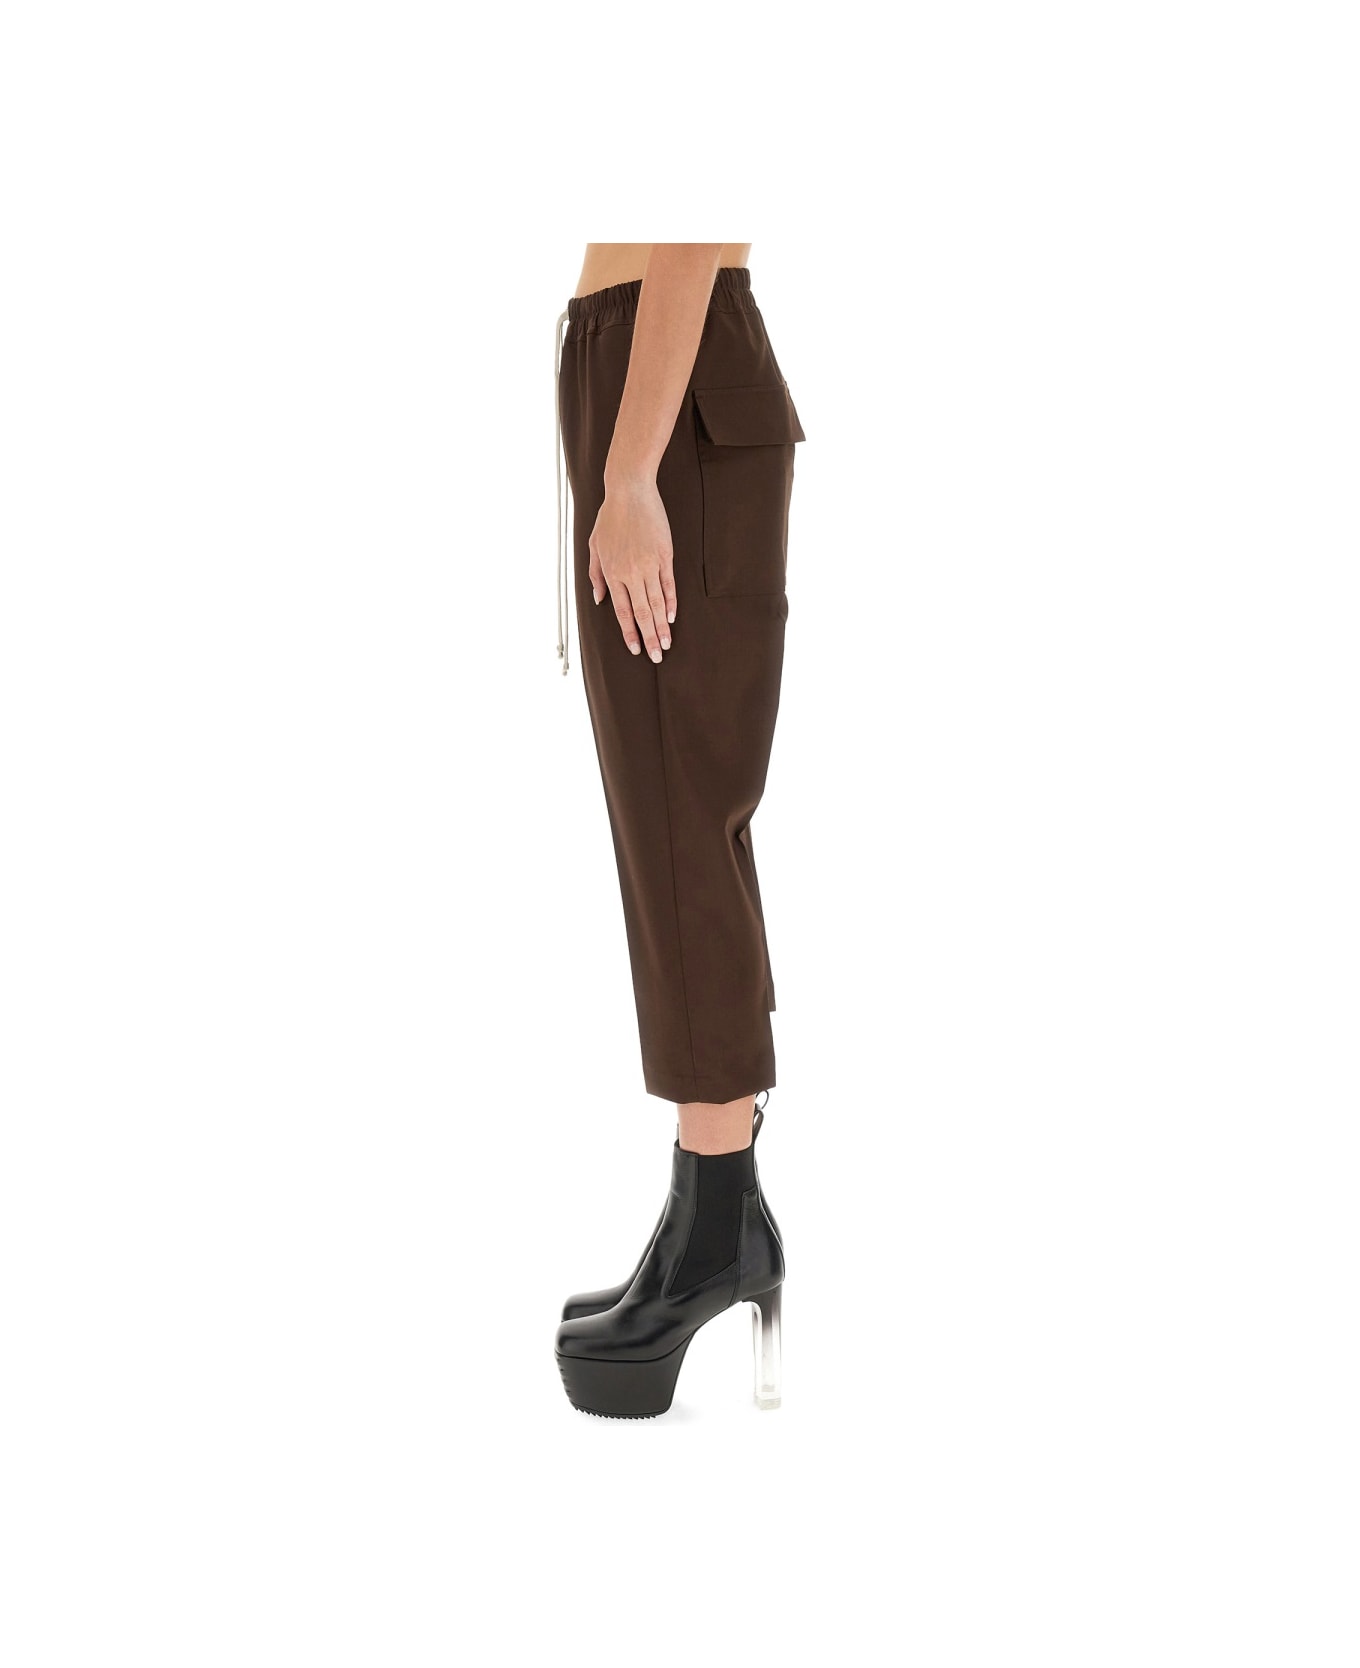 Rick Owens Drawstring Astaires Cropped Pants - BROWN